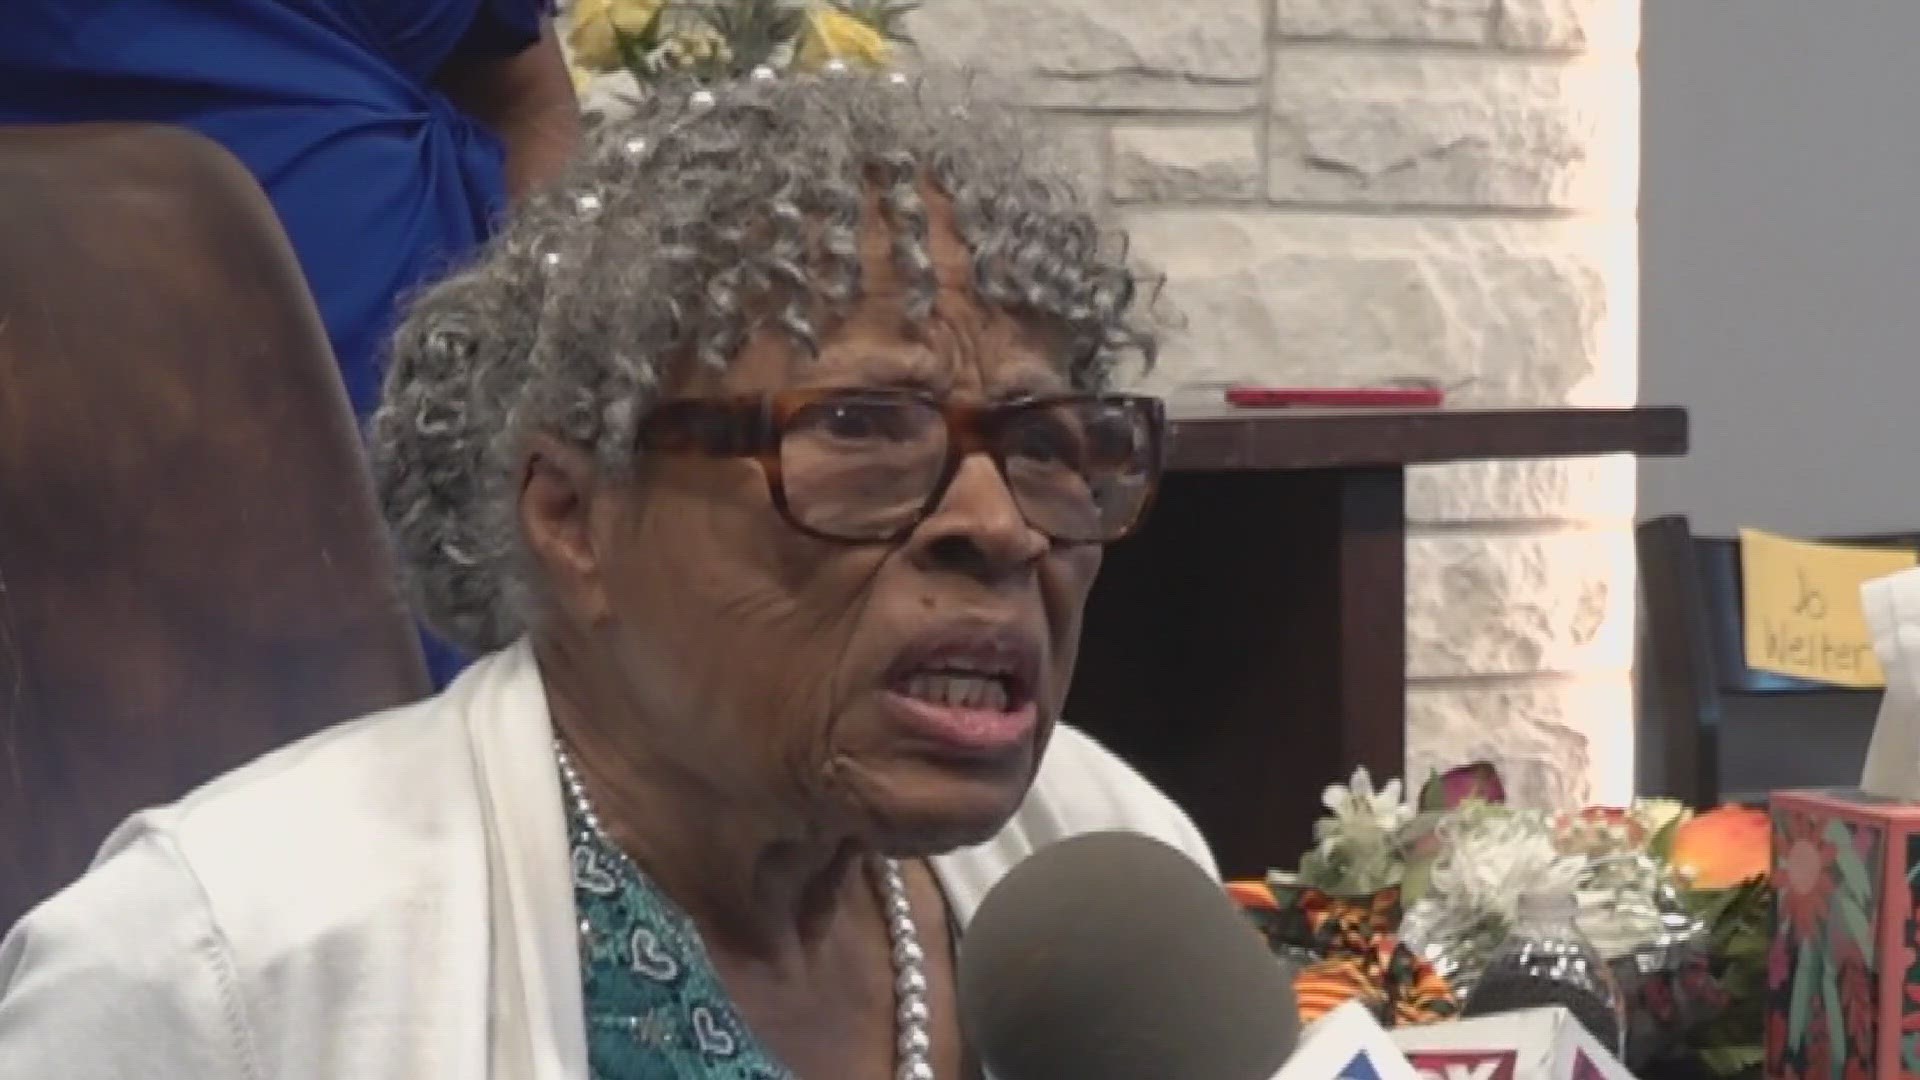 While the Grandmother of Juneteenth visited Waco, the City honored the day in her name.